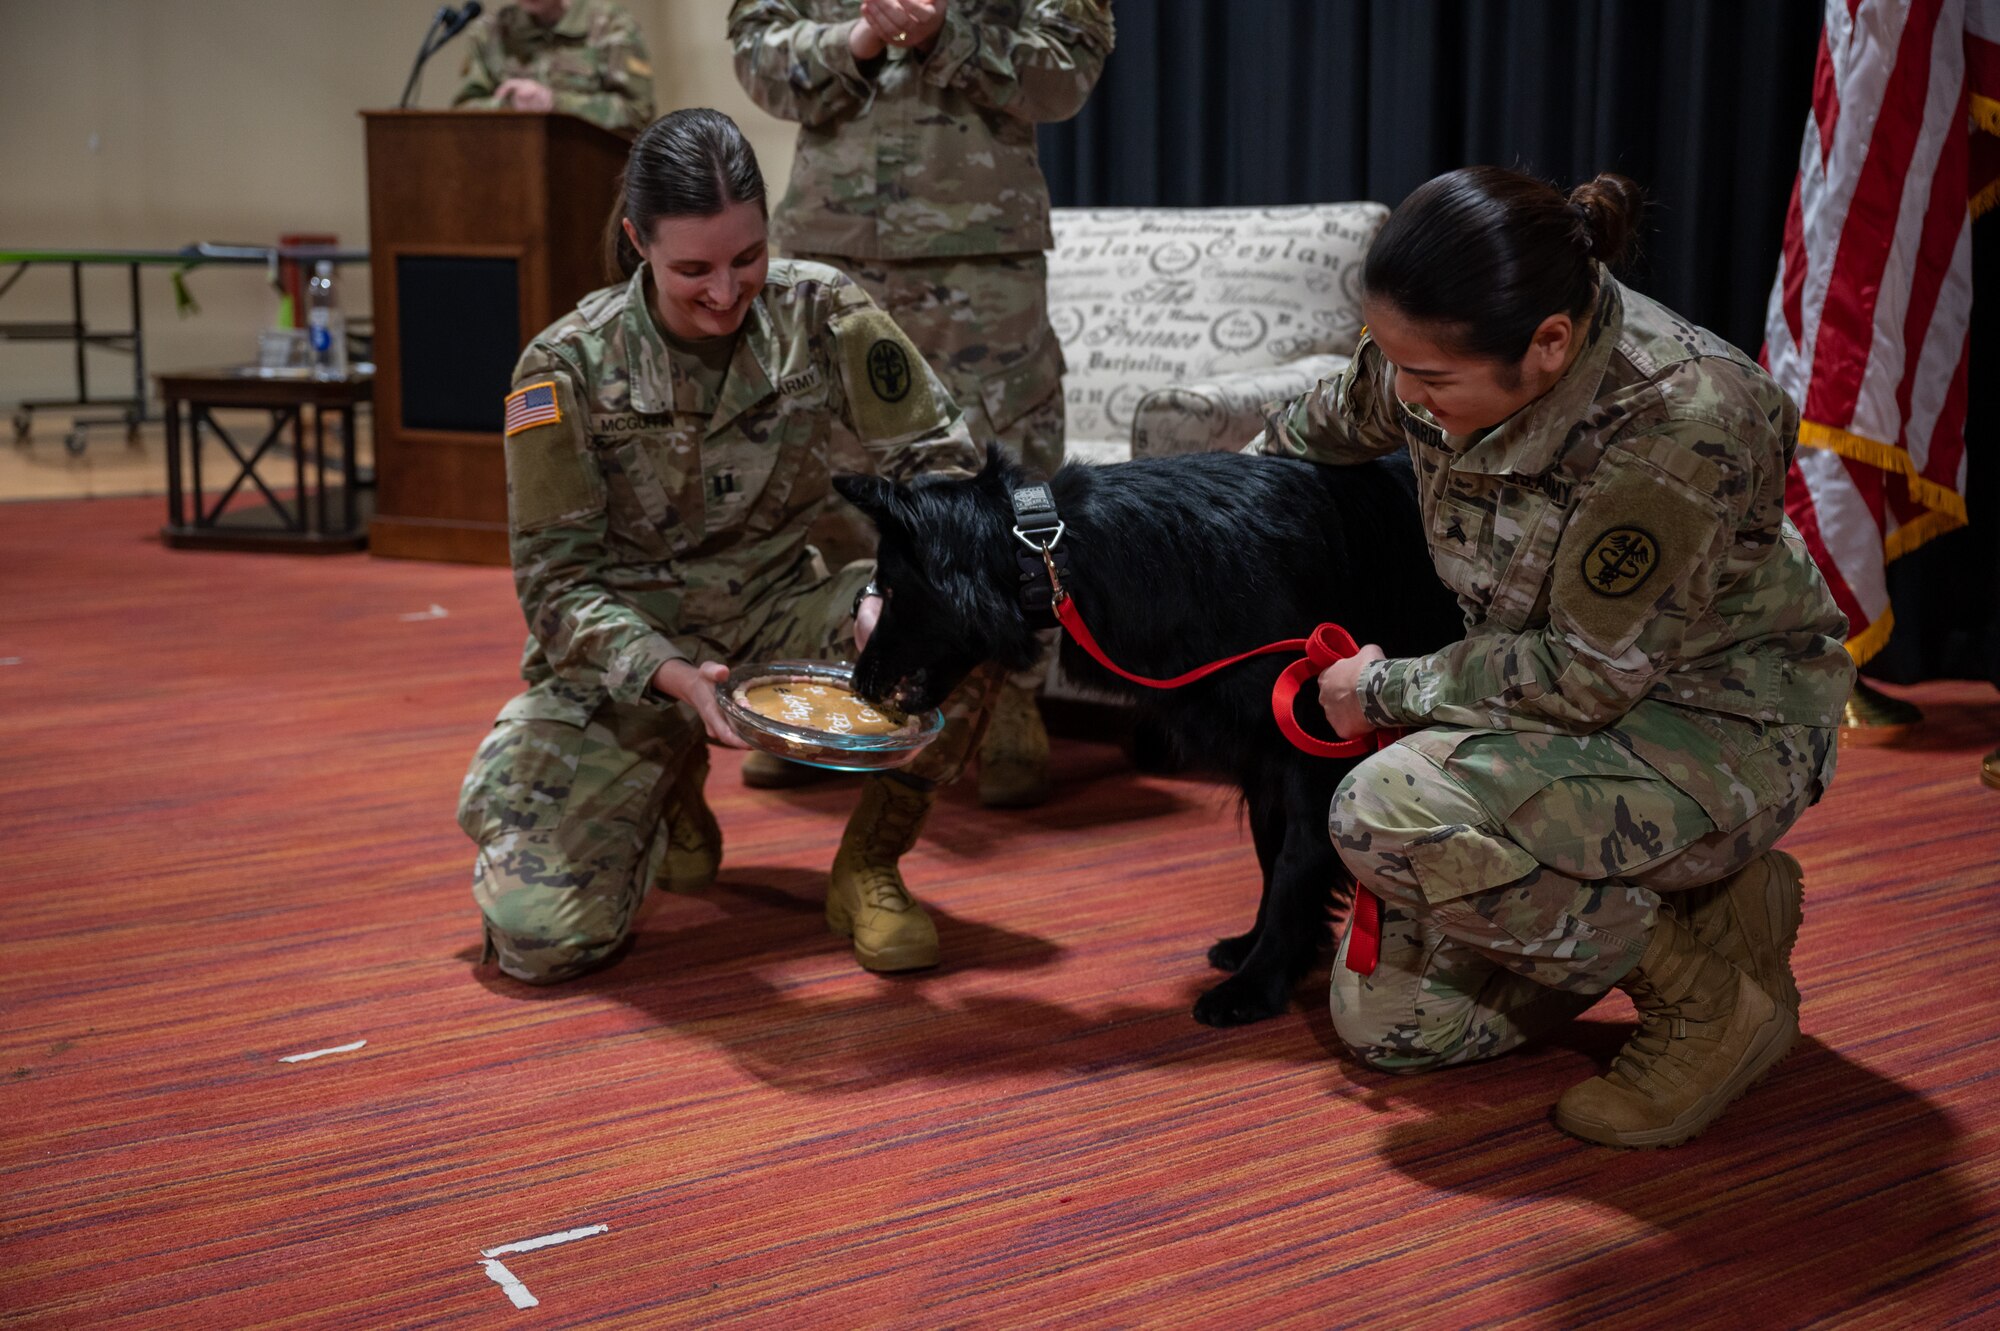 Military Working Dog Cento during his retirement ceremony at Misawa Air Base, Japan, March 6, 2023. Cento served for eight years patrolling the installation, detecting explosives as well as controlled substances, and performing intrusion detection. (U.S. Air Force photo by Staff Sgt. Caroline Parks)